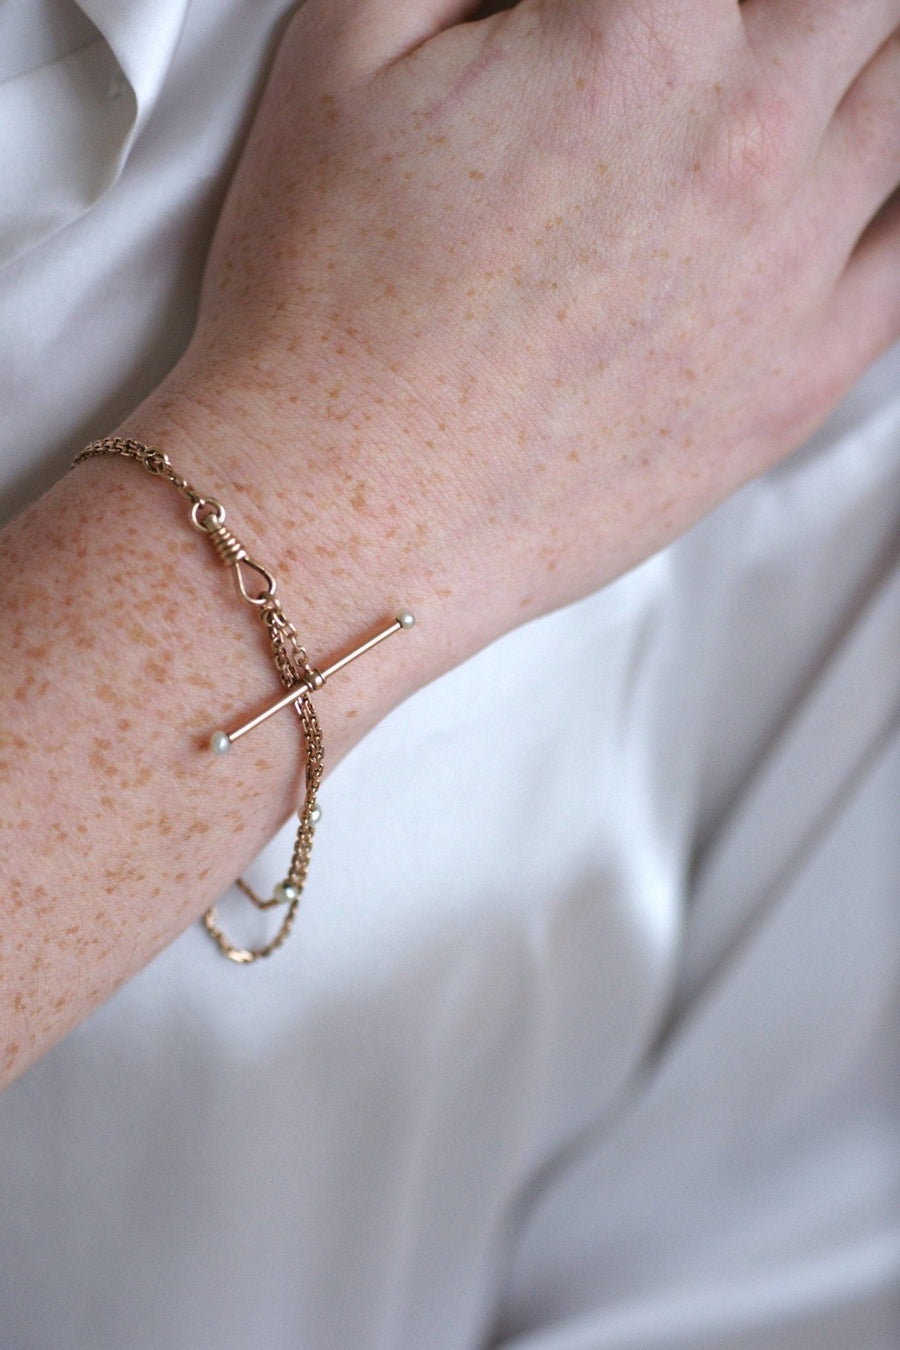 Bracelet, watch chain, rose gold and pearls - Penelope Gallery